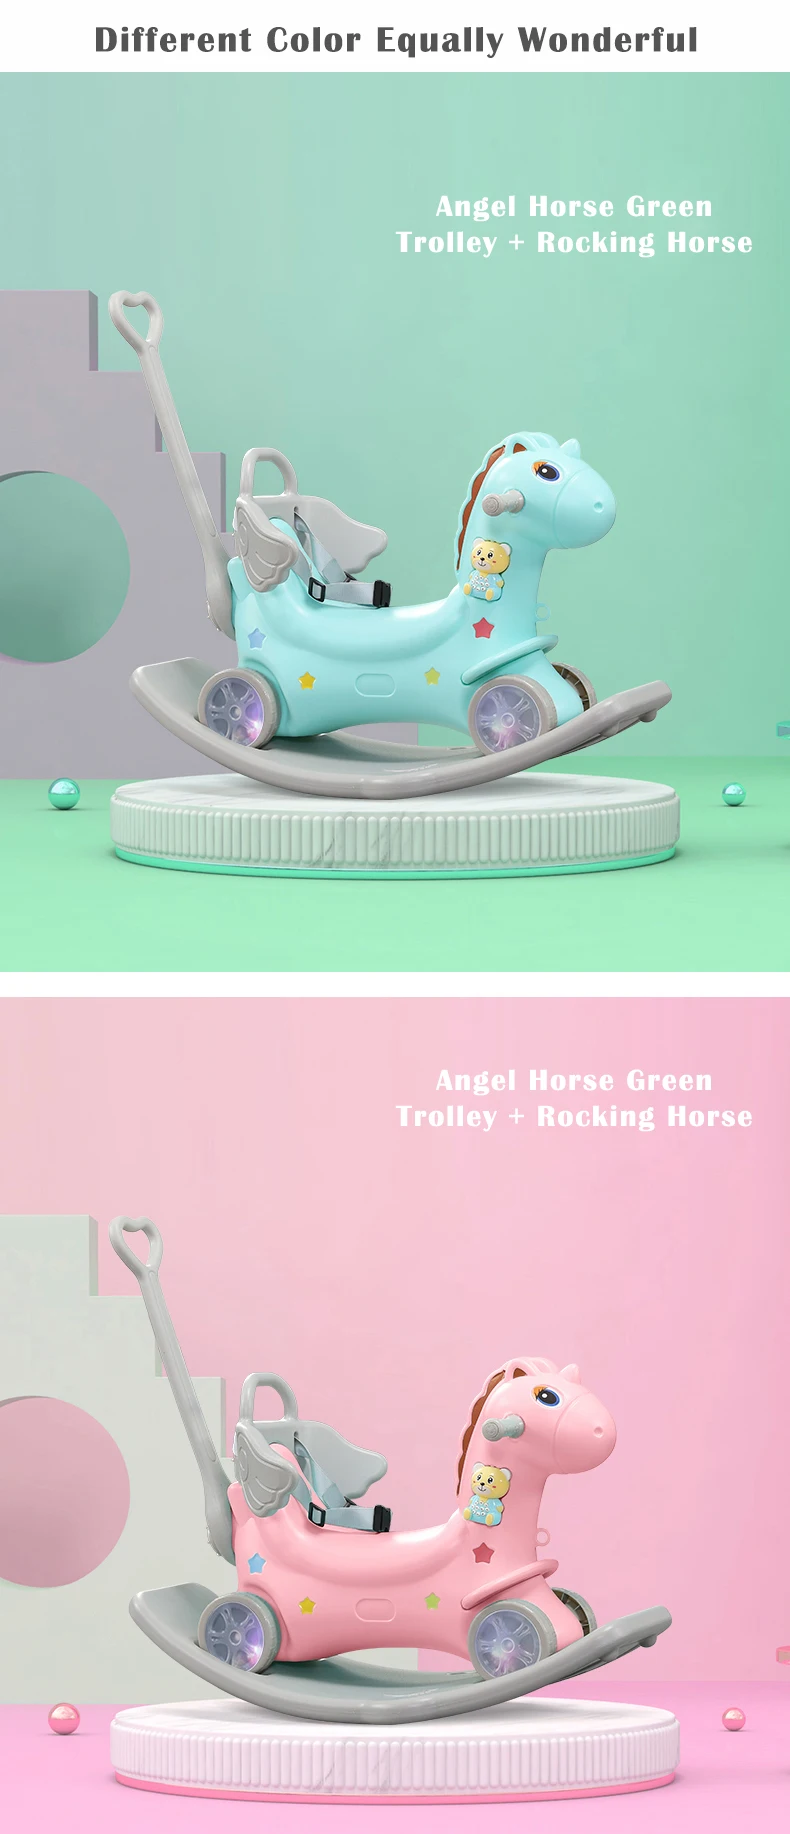 Infant Shining Kids Ride on Toys 2in1 Rocking Horse 1-6 Years Indoor Ride Large size Flash Wheels Trolley Toys Baby Games